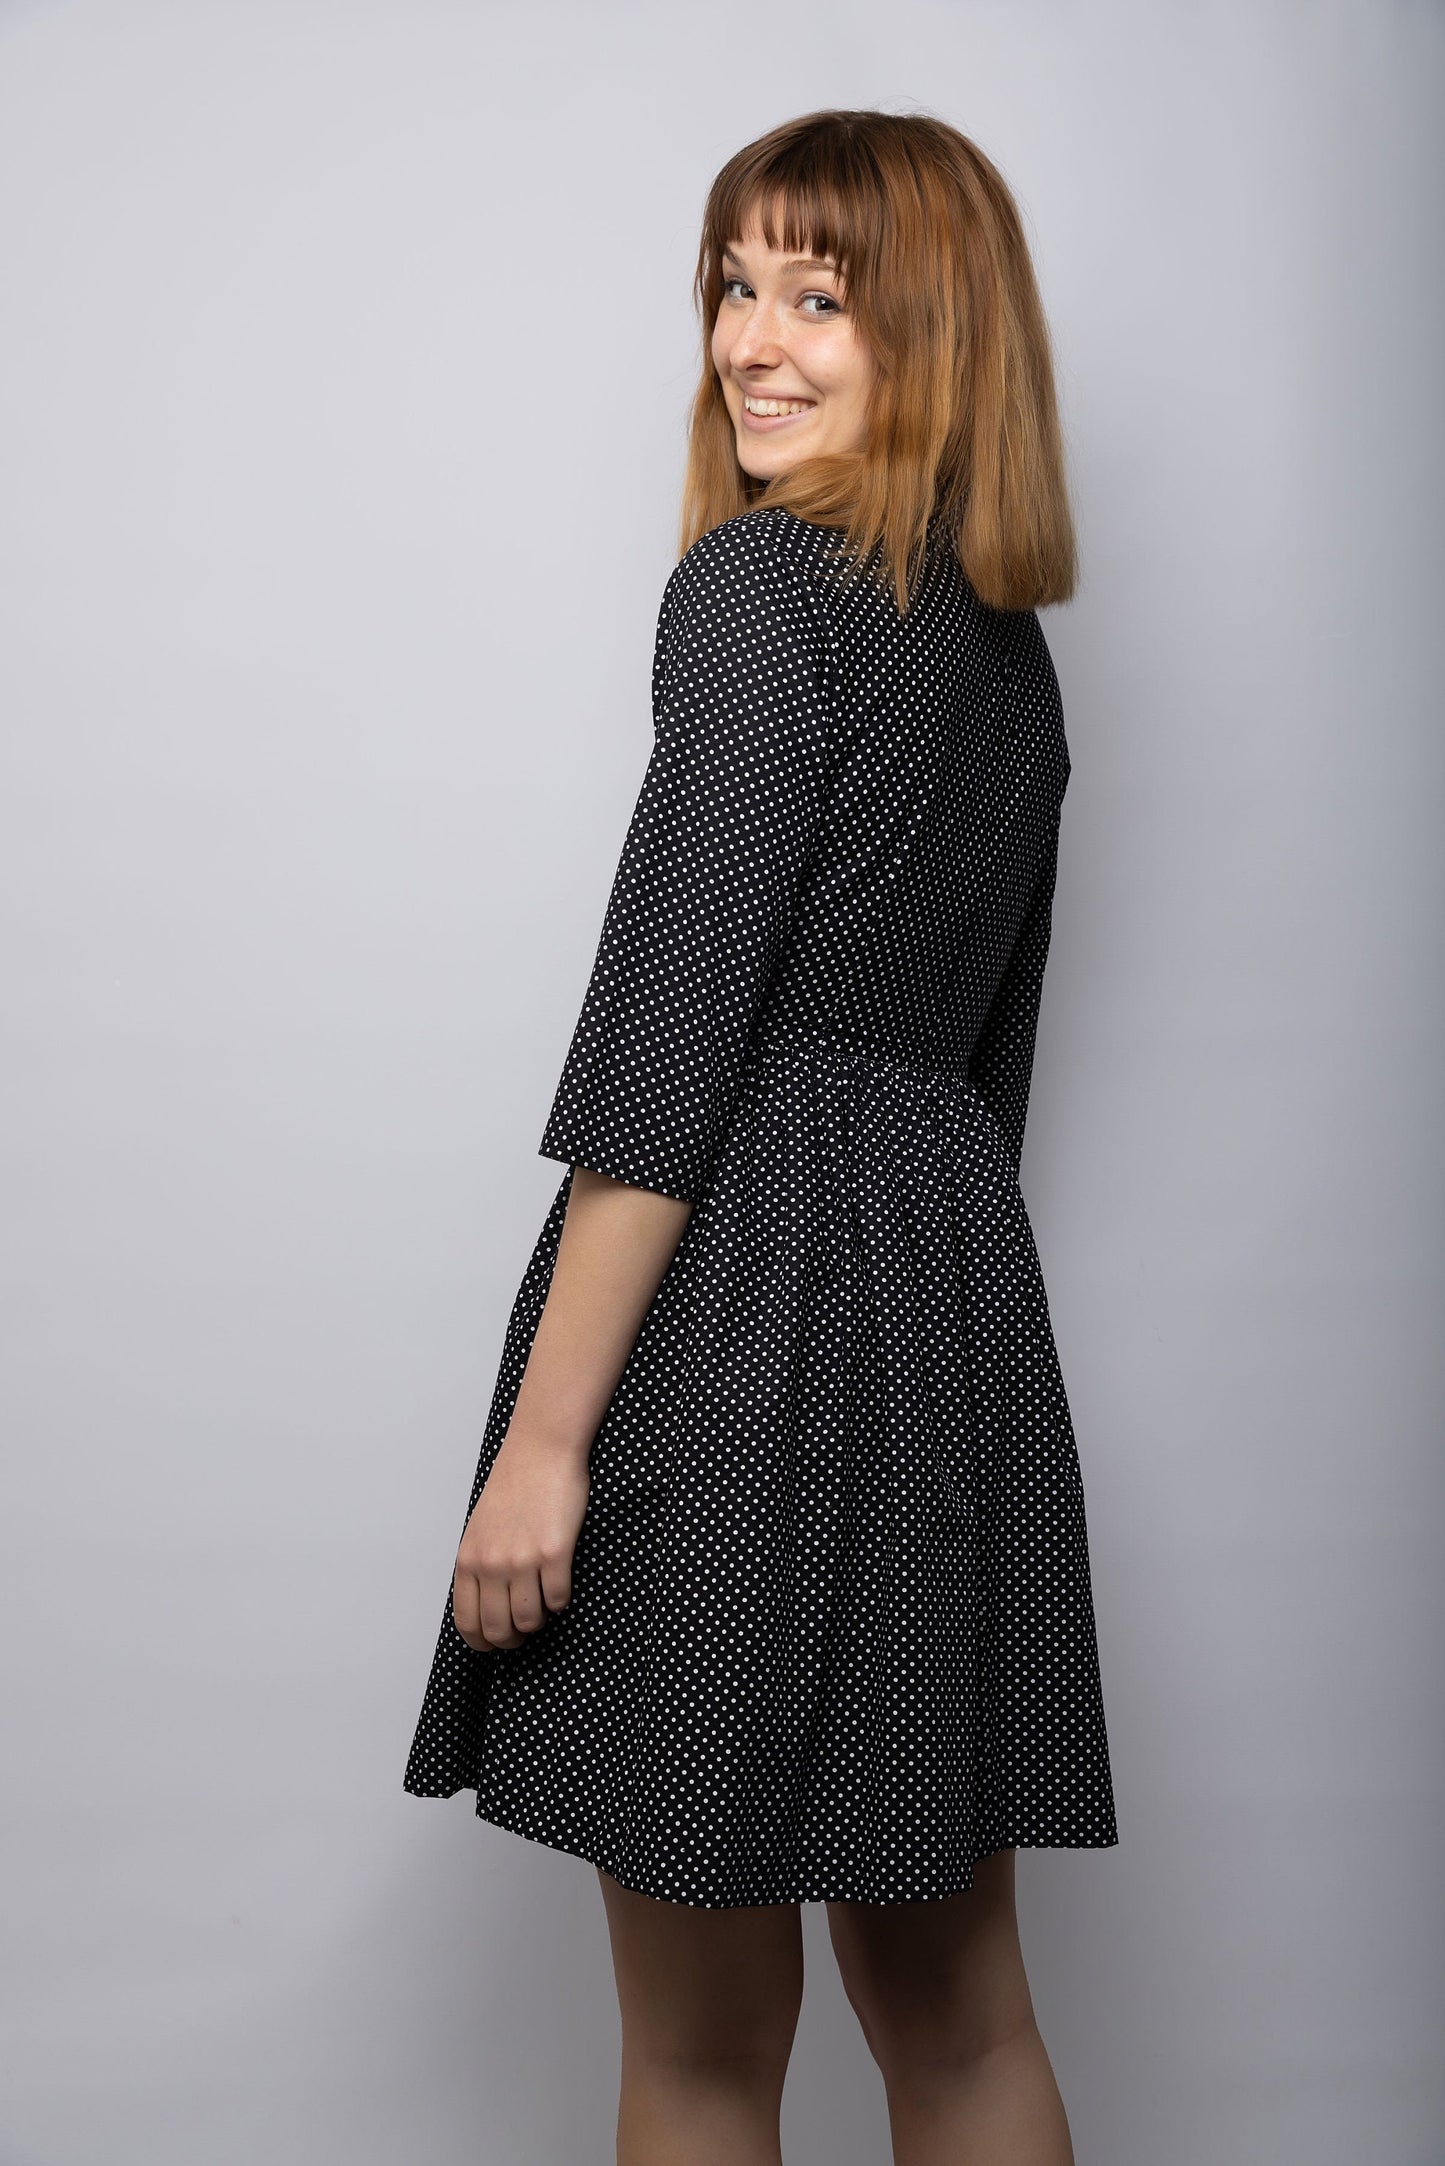 The Lily Dress is perfect for 1950s chic style. This Black tea dress is made with a vintage-inspired silhouette and is crafted from a comfortable lightweight fabric. Enjoy the perfect fit and timeless style of this comfortable dress., cotton dress